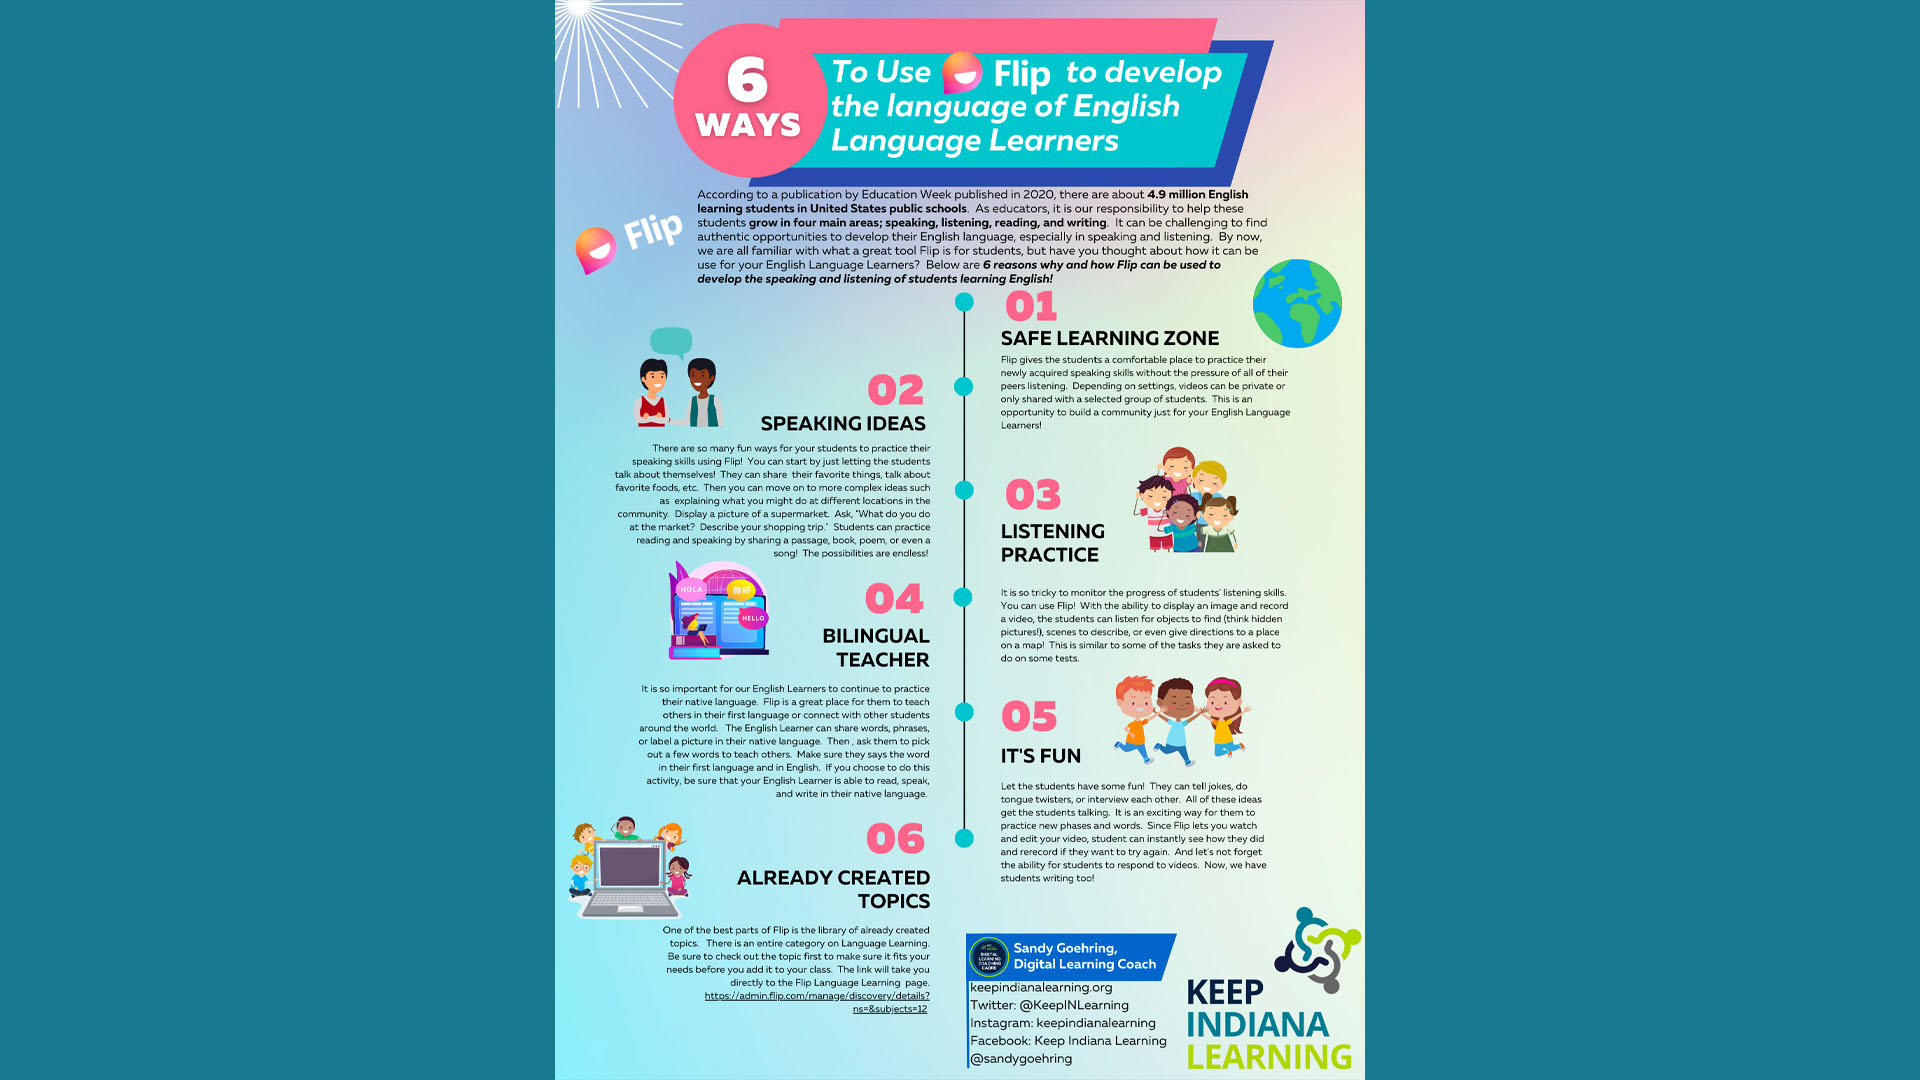 Illustrative Infographic for using Flip in 6 Different Ways.